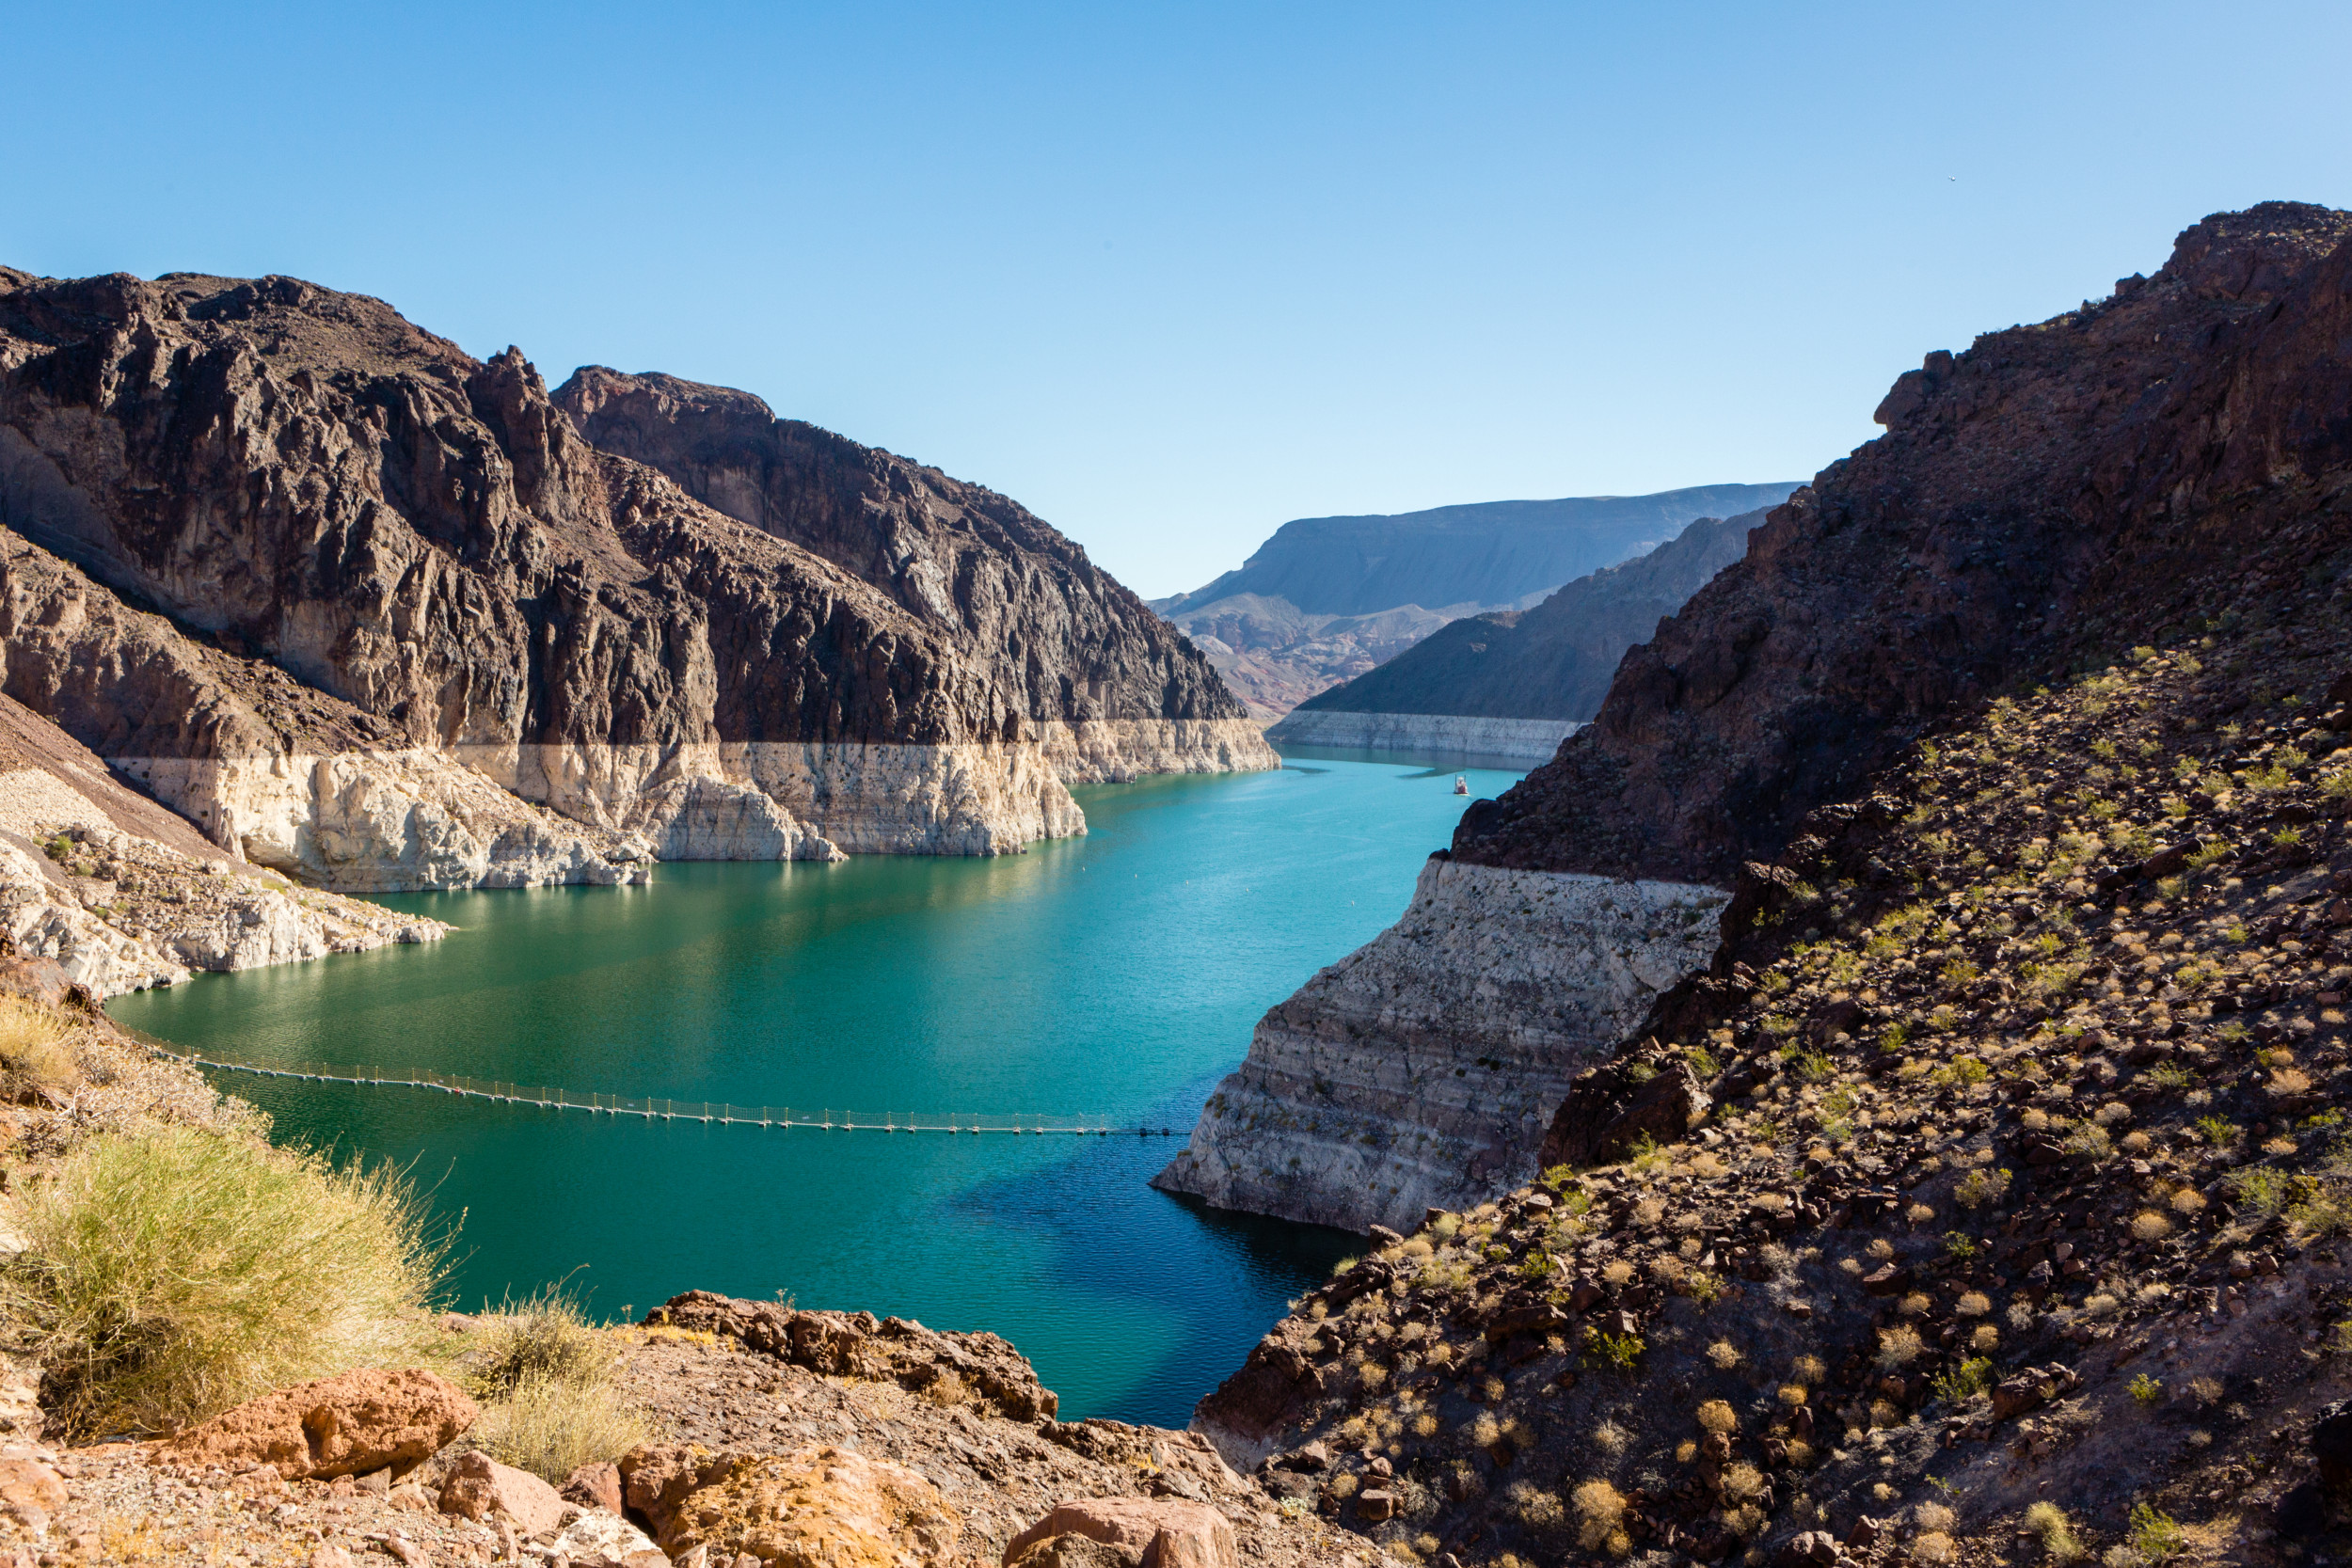 Lake Mead’s water level is falling